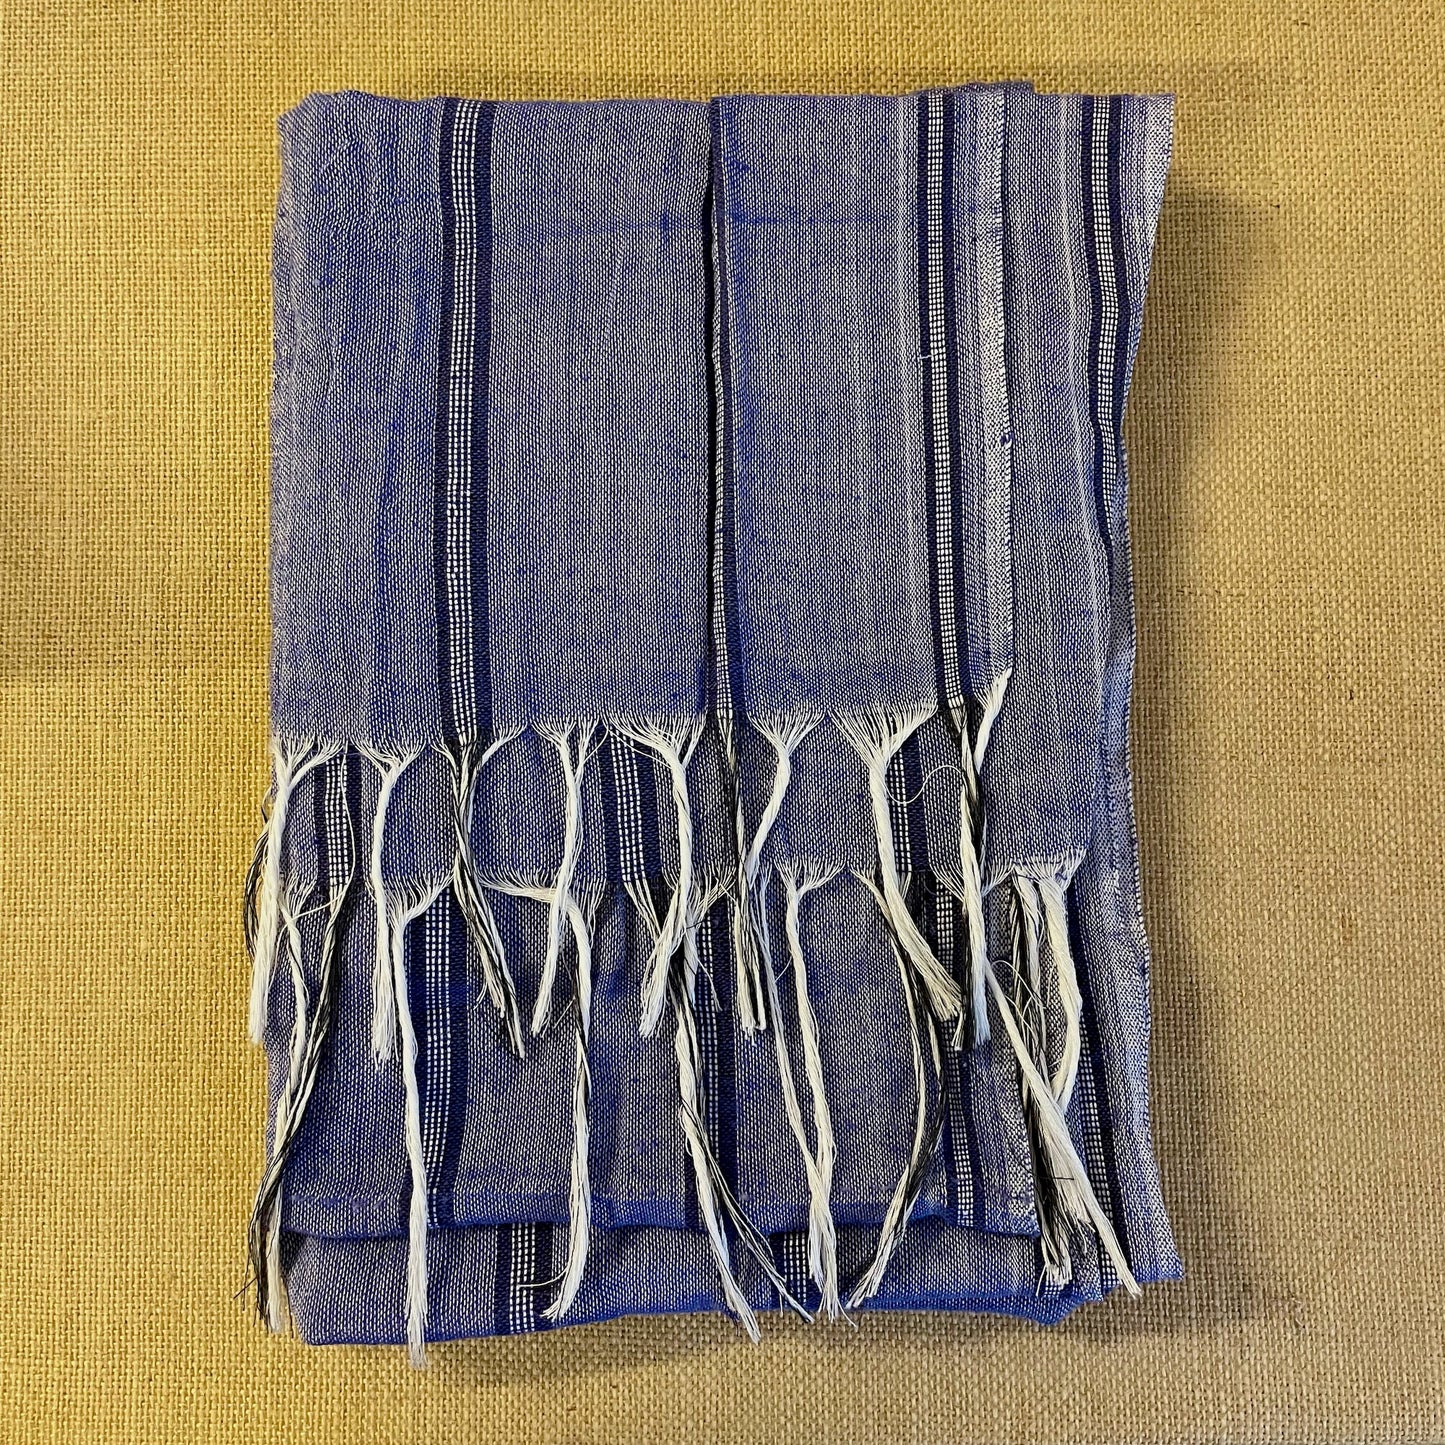 Handwoven Long Blue Striped Cactus Silk Scarf folded